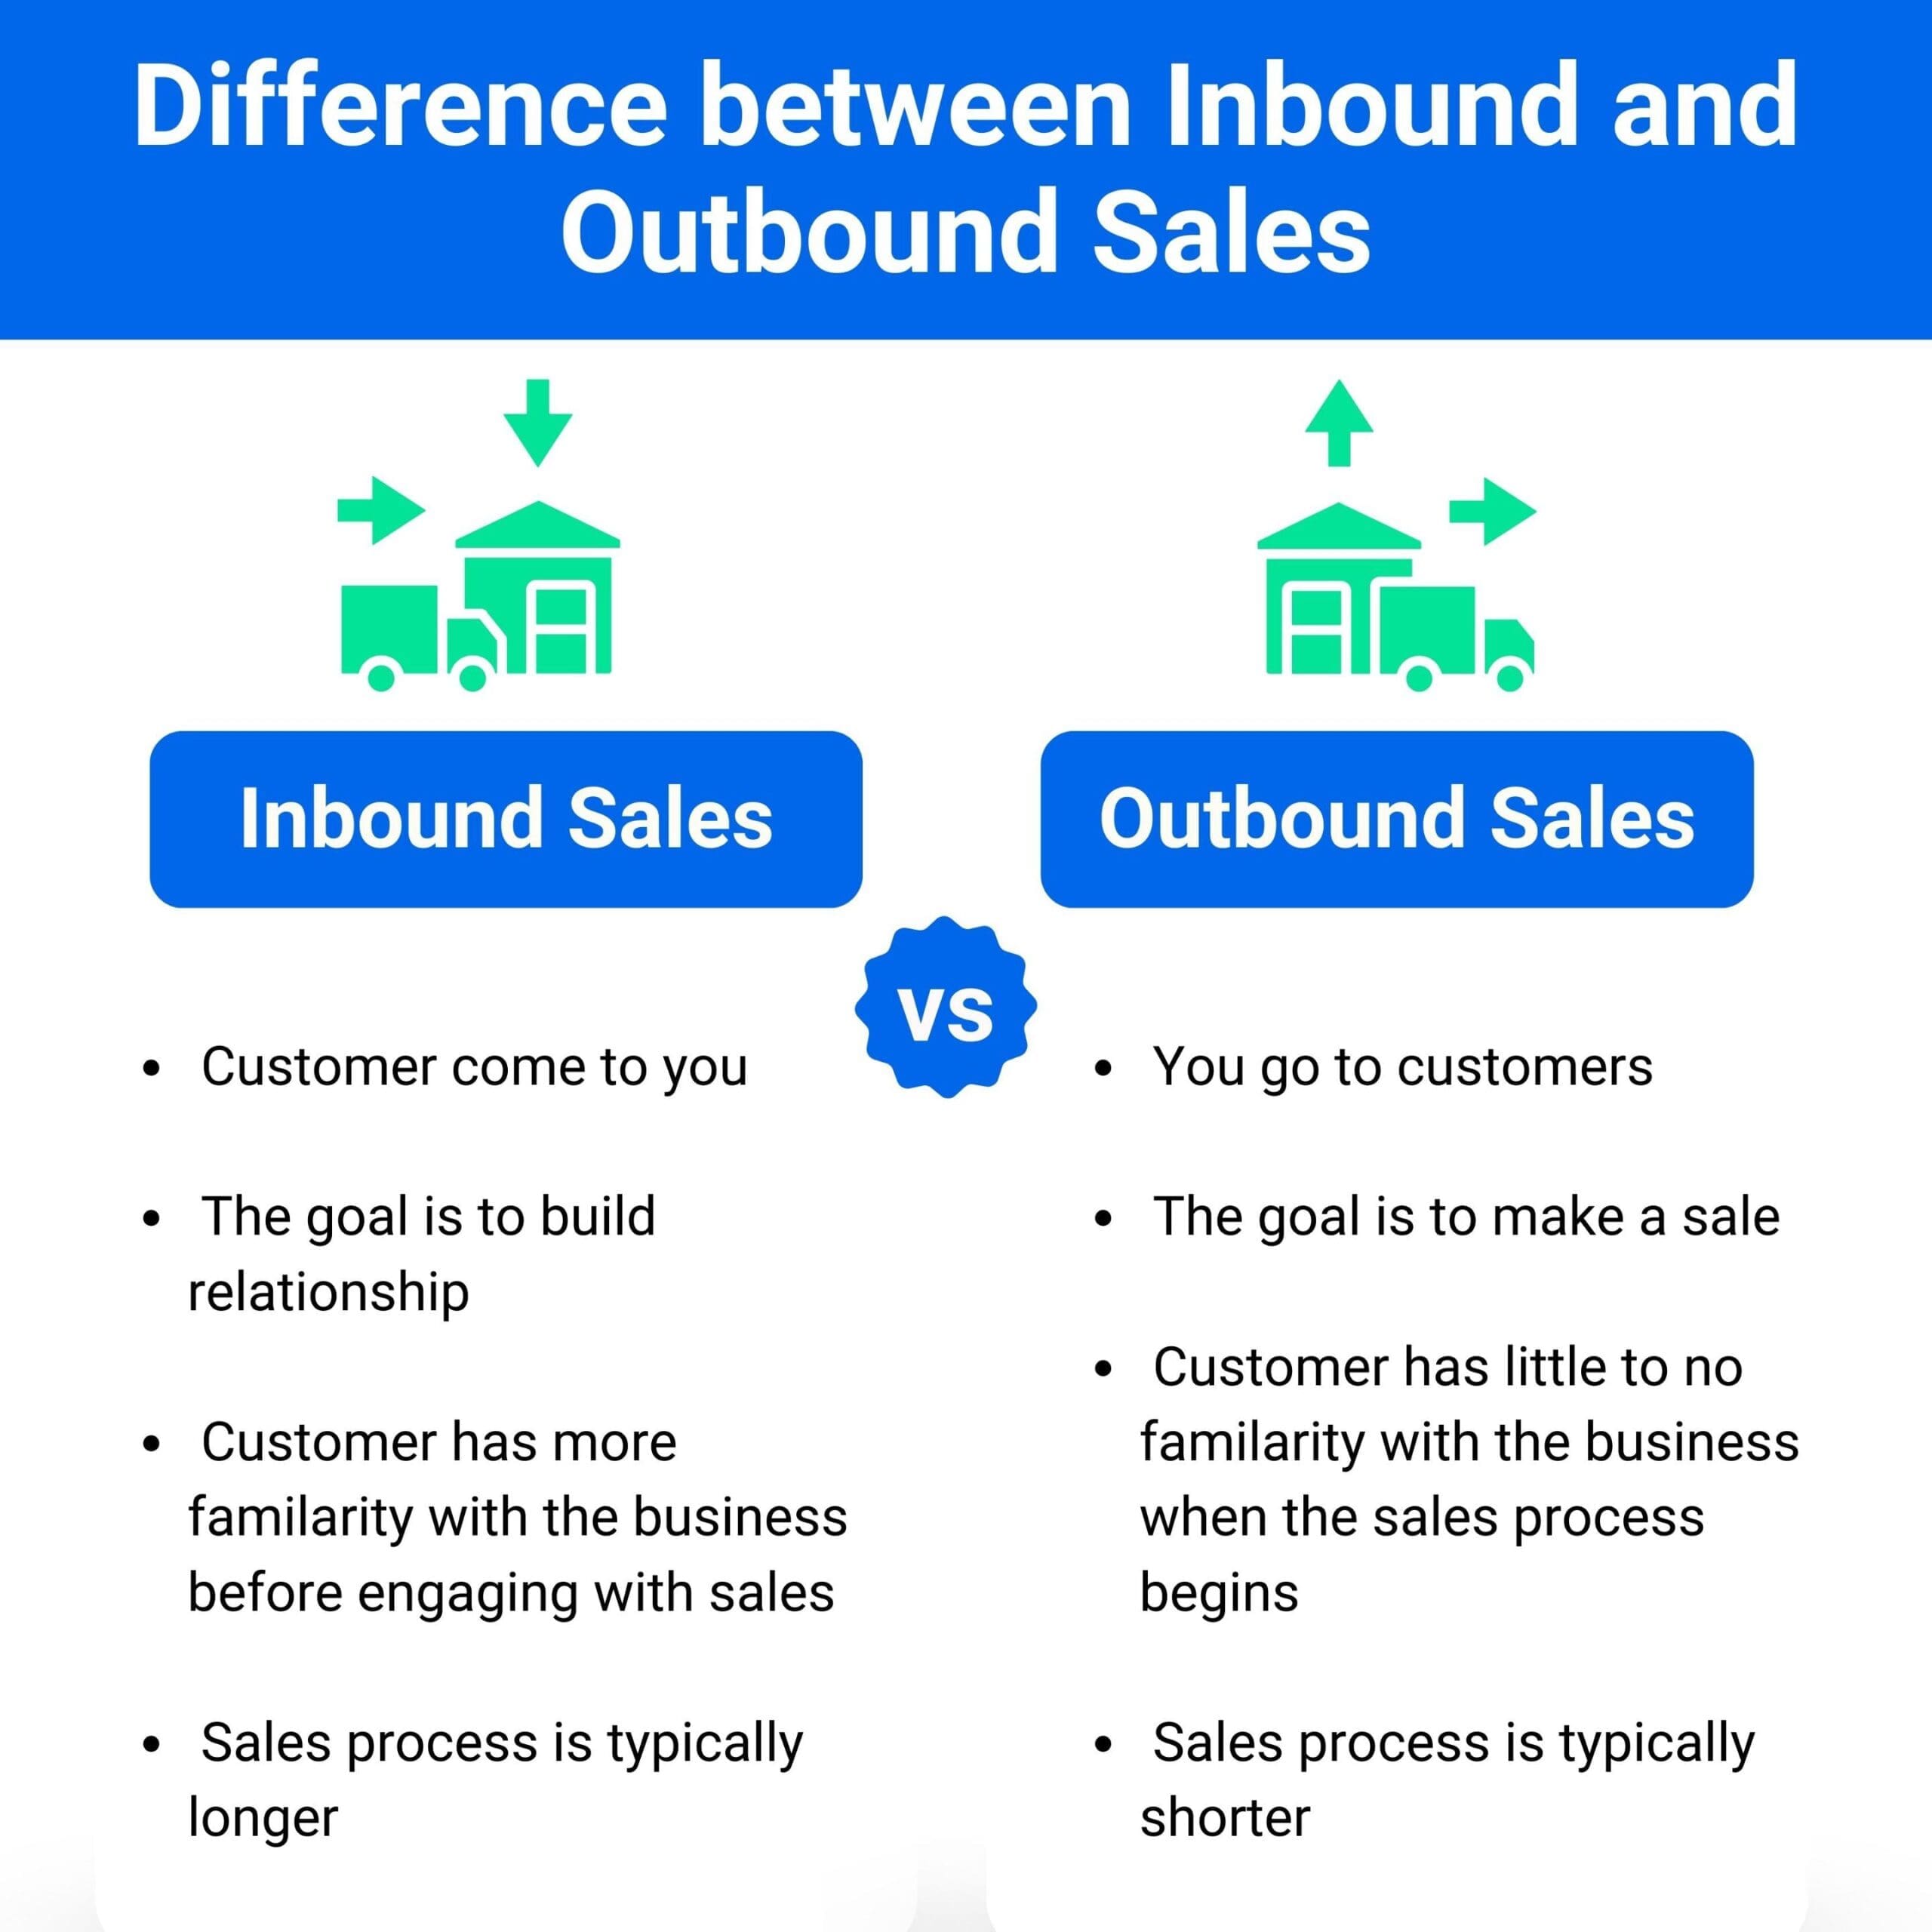 Difference between inbound and outbound sales